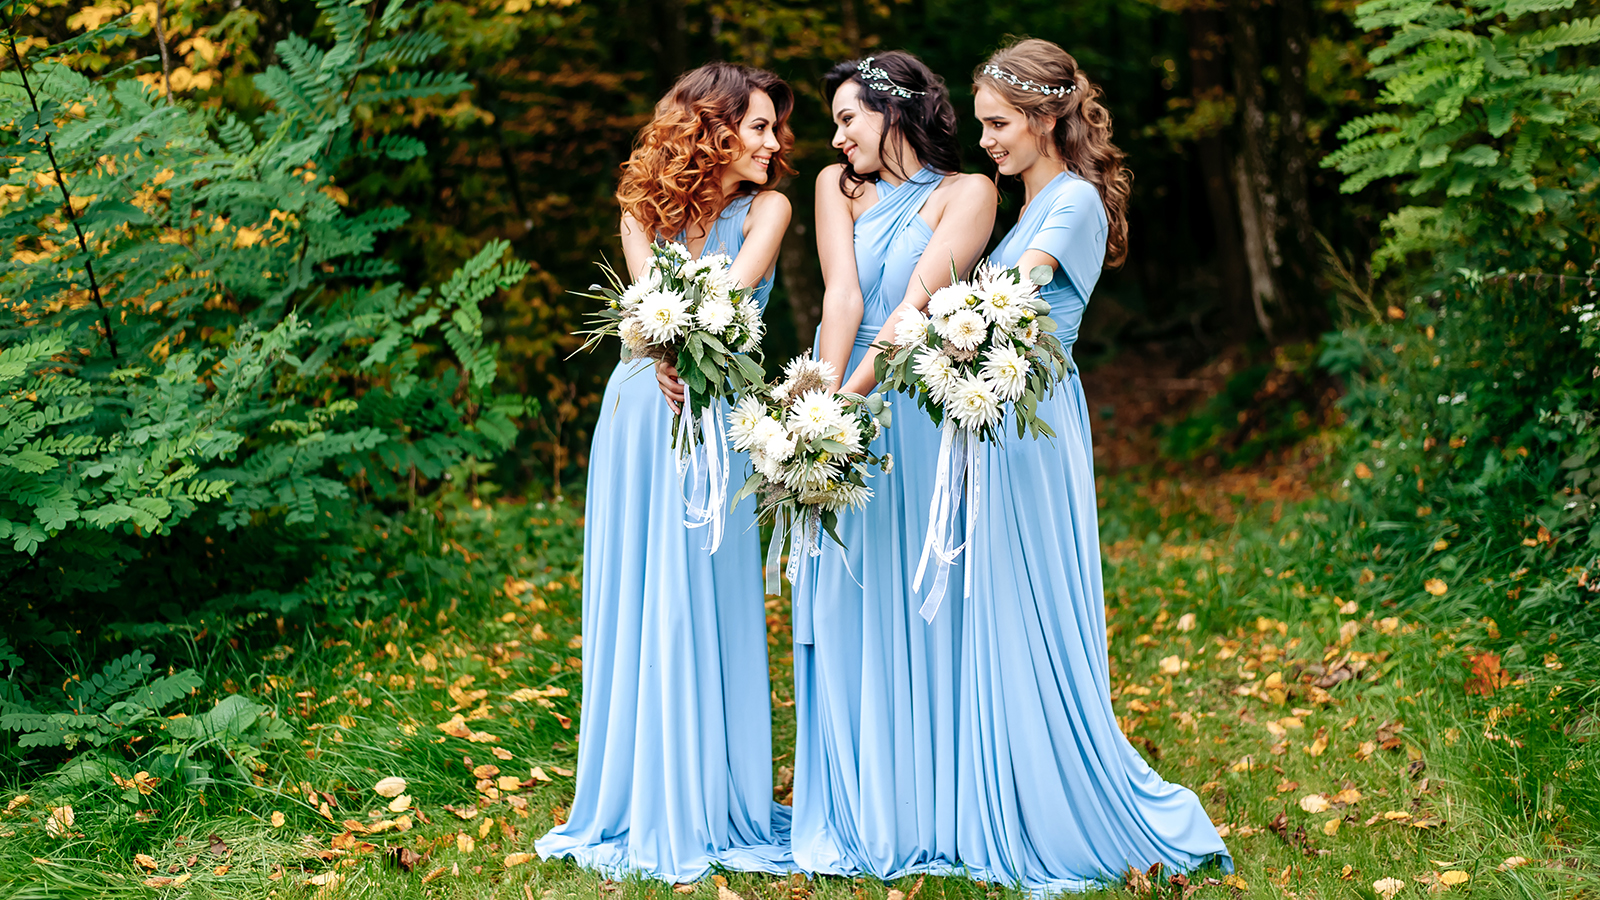 Beautiful cute girls are walking in the park. Three bridesmaids posing for a photographer. Beautiful green background. Nature.